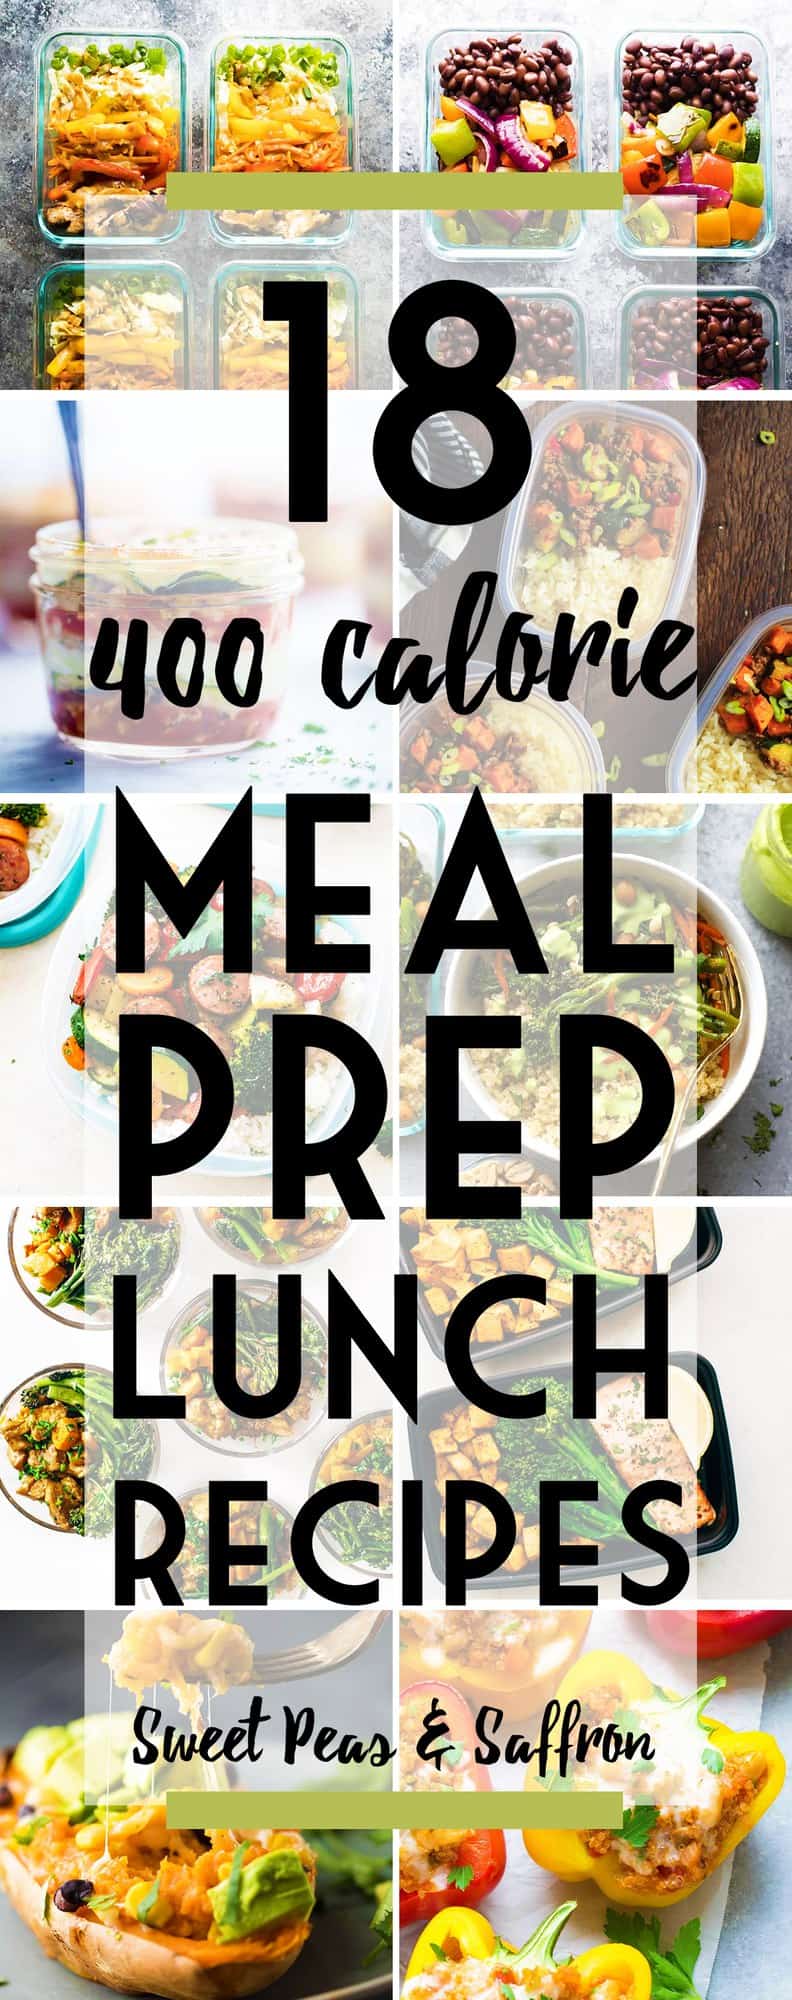 Meal Prep Lunch Recipes Under 400 Calories | Sweet Peas and Saffron